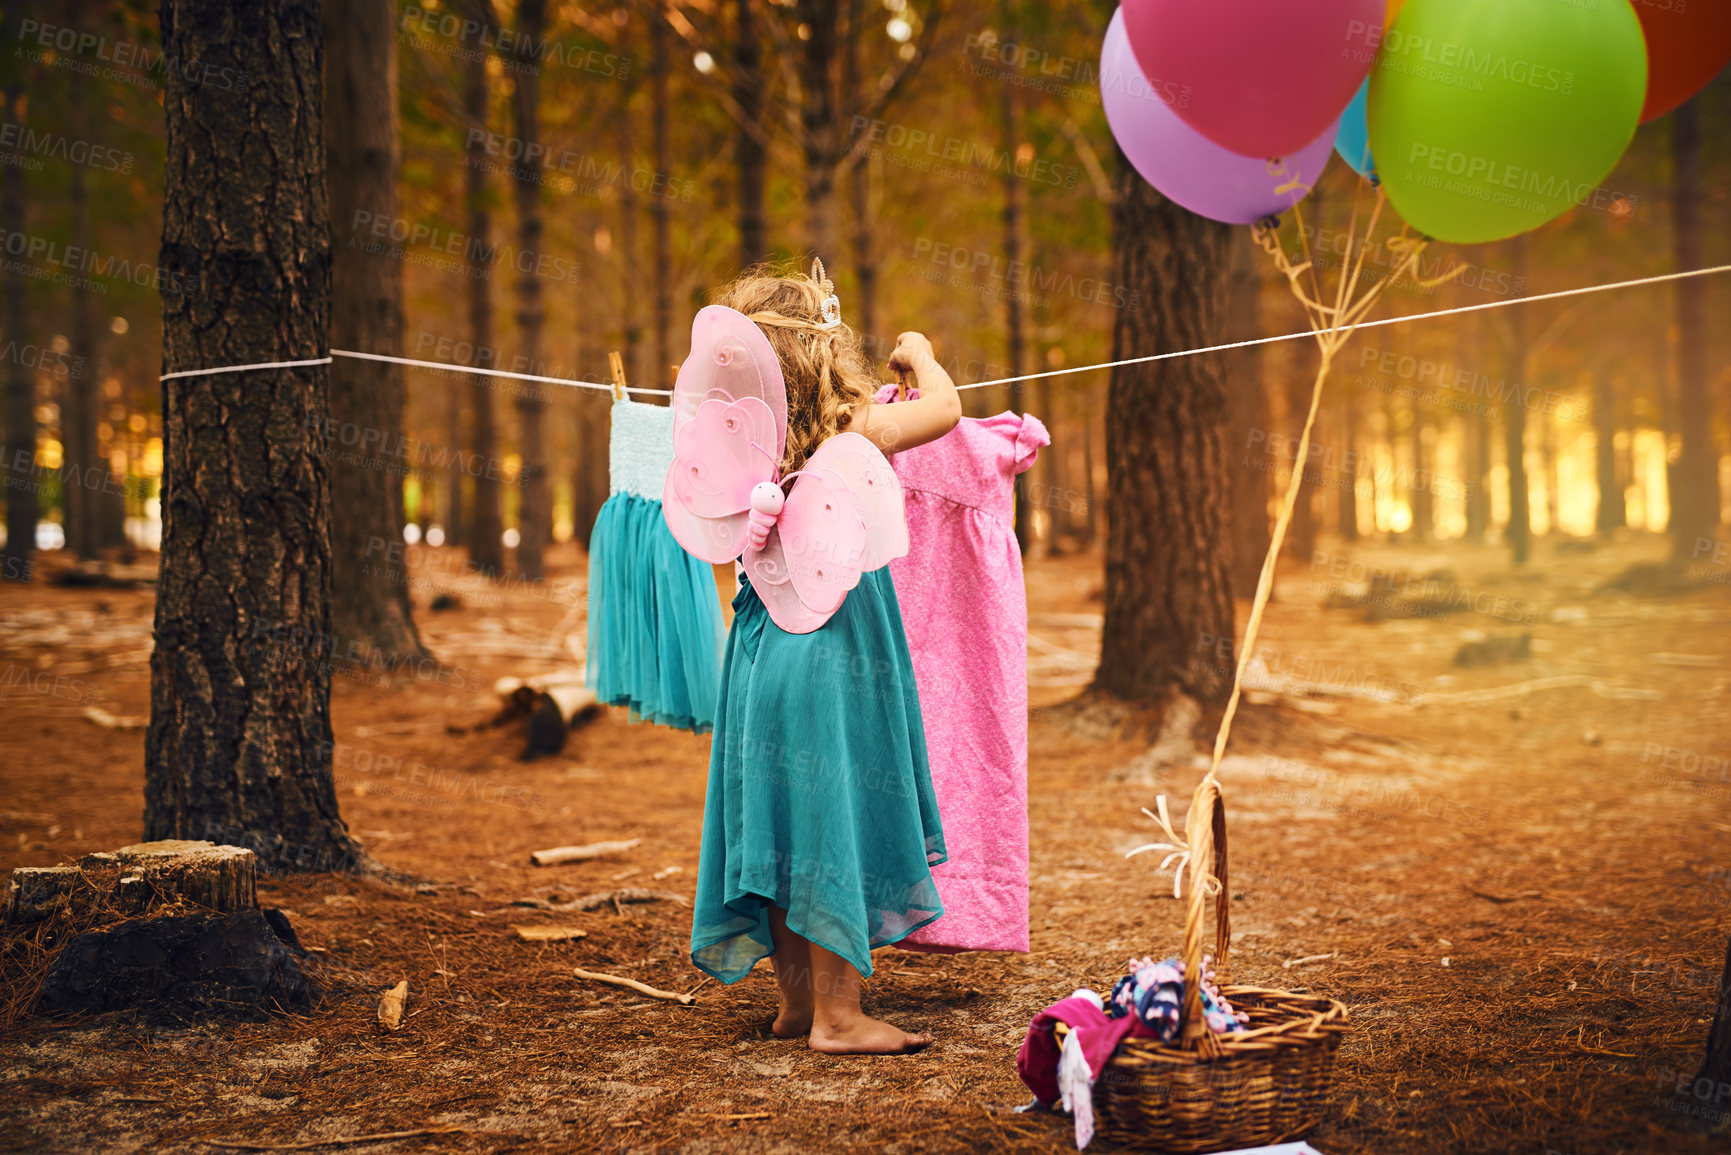 Buy stock photo Shot of an unrecognizable little girl hanging a dress up on a piece of rope while standing outside in the woods